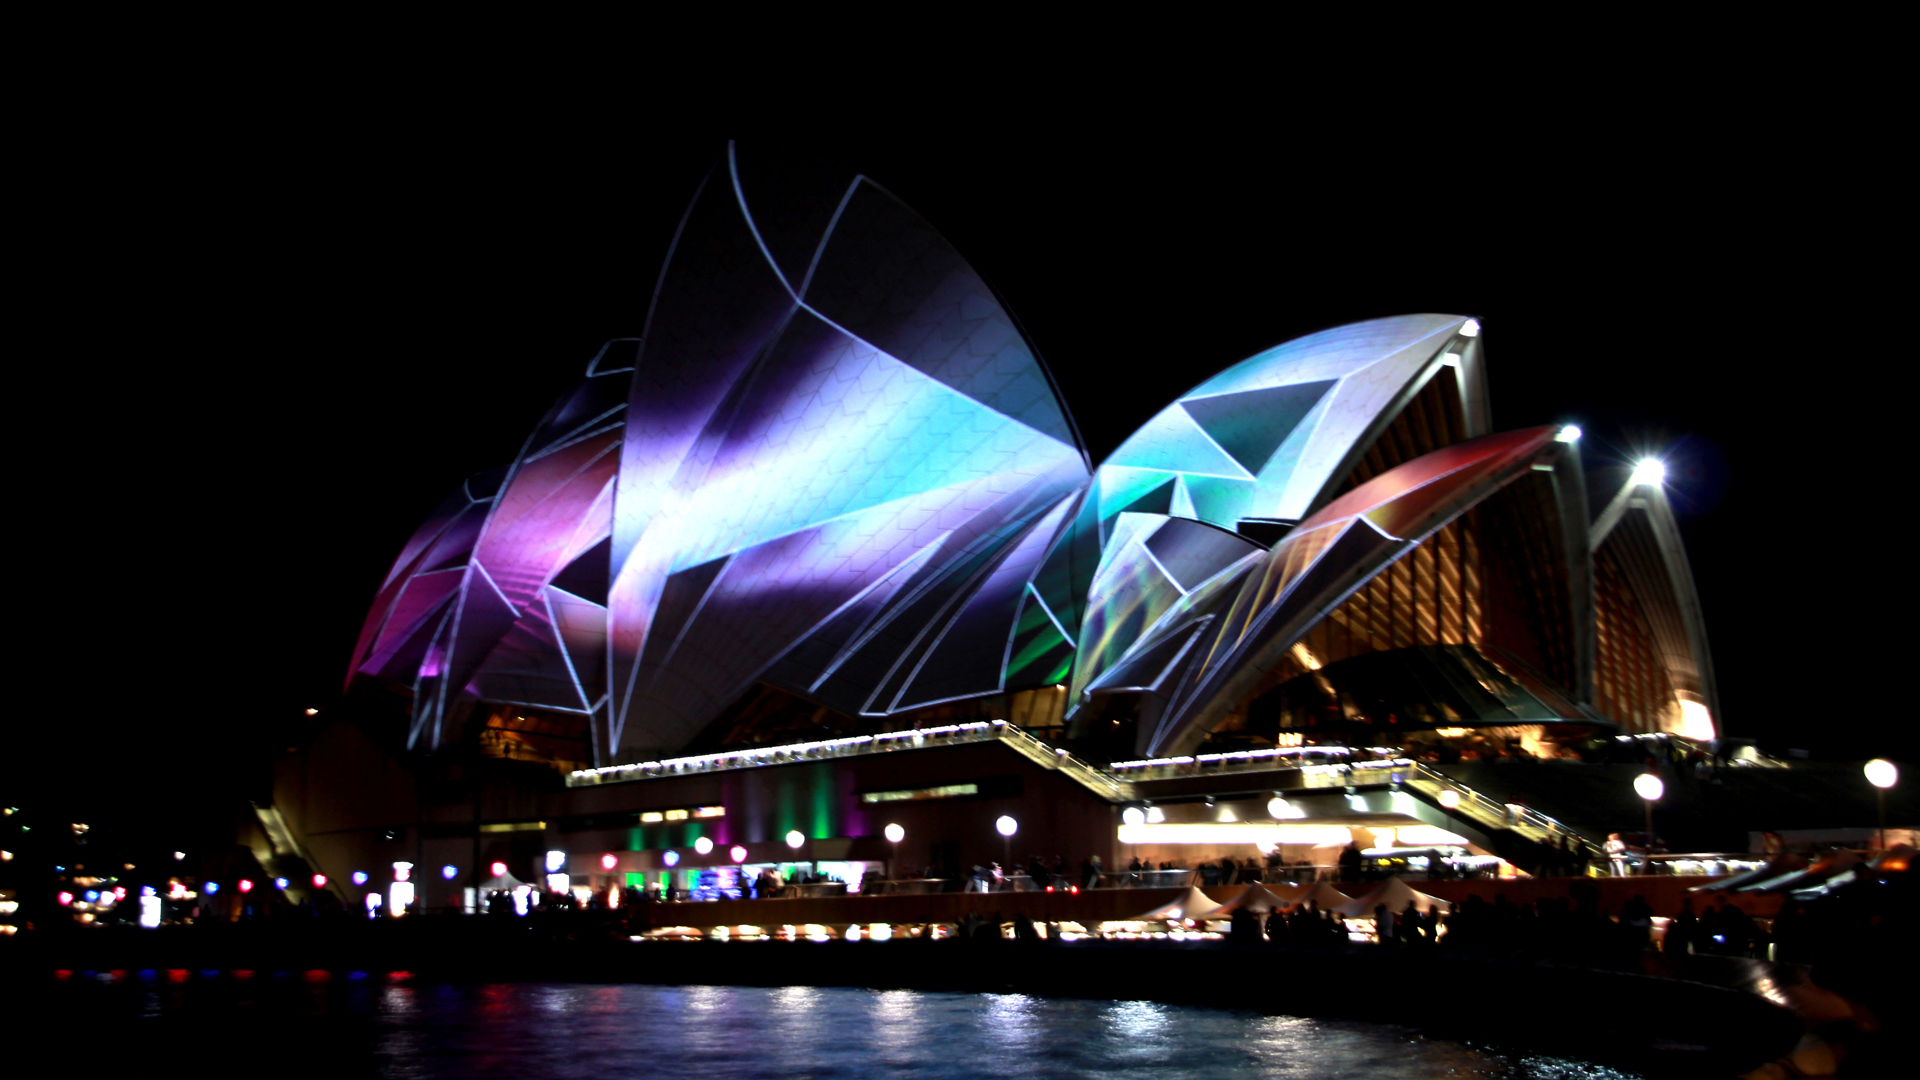 Sydney Opera House An architectural inspiration